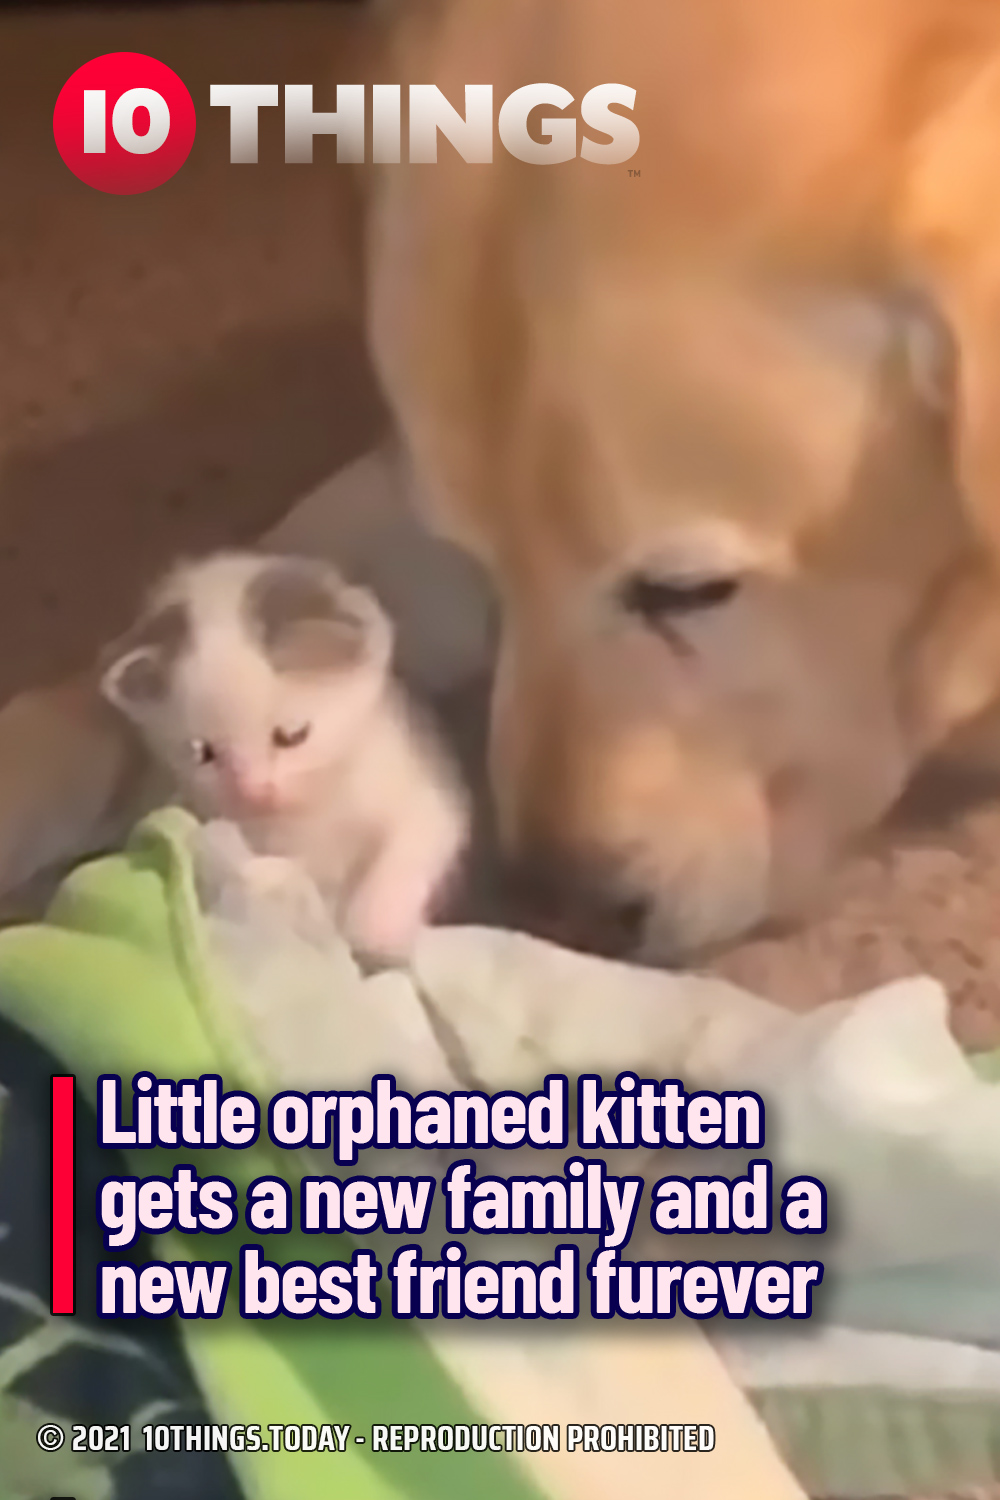 Little orphaned kitten gets a new family and a new best friend furever